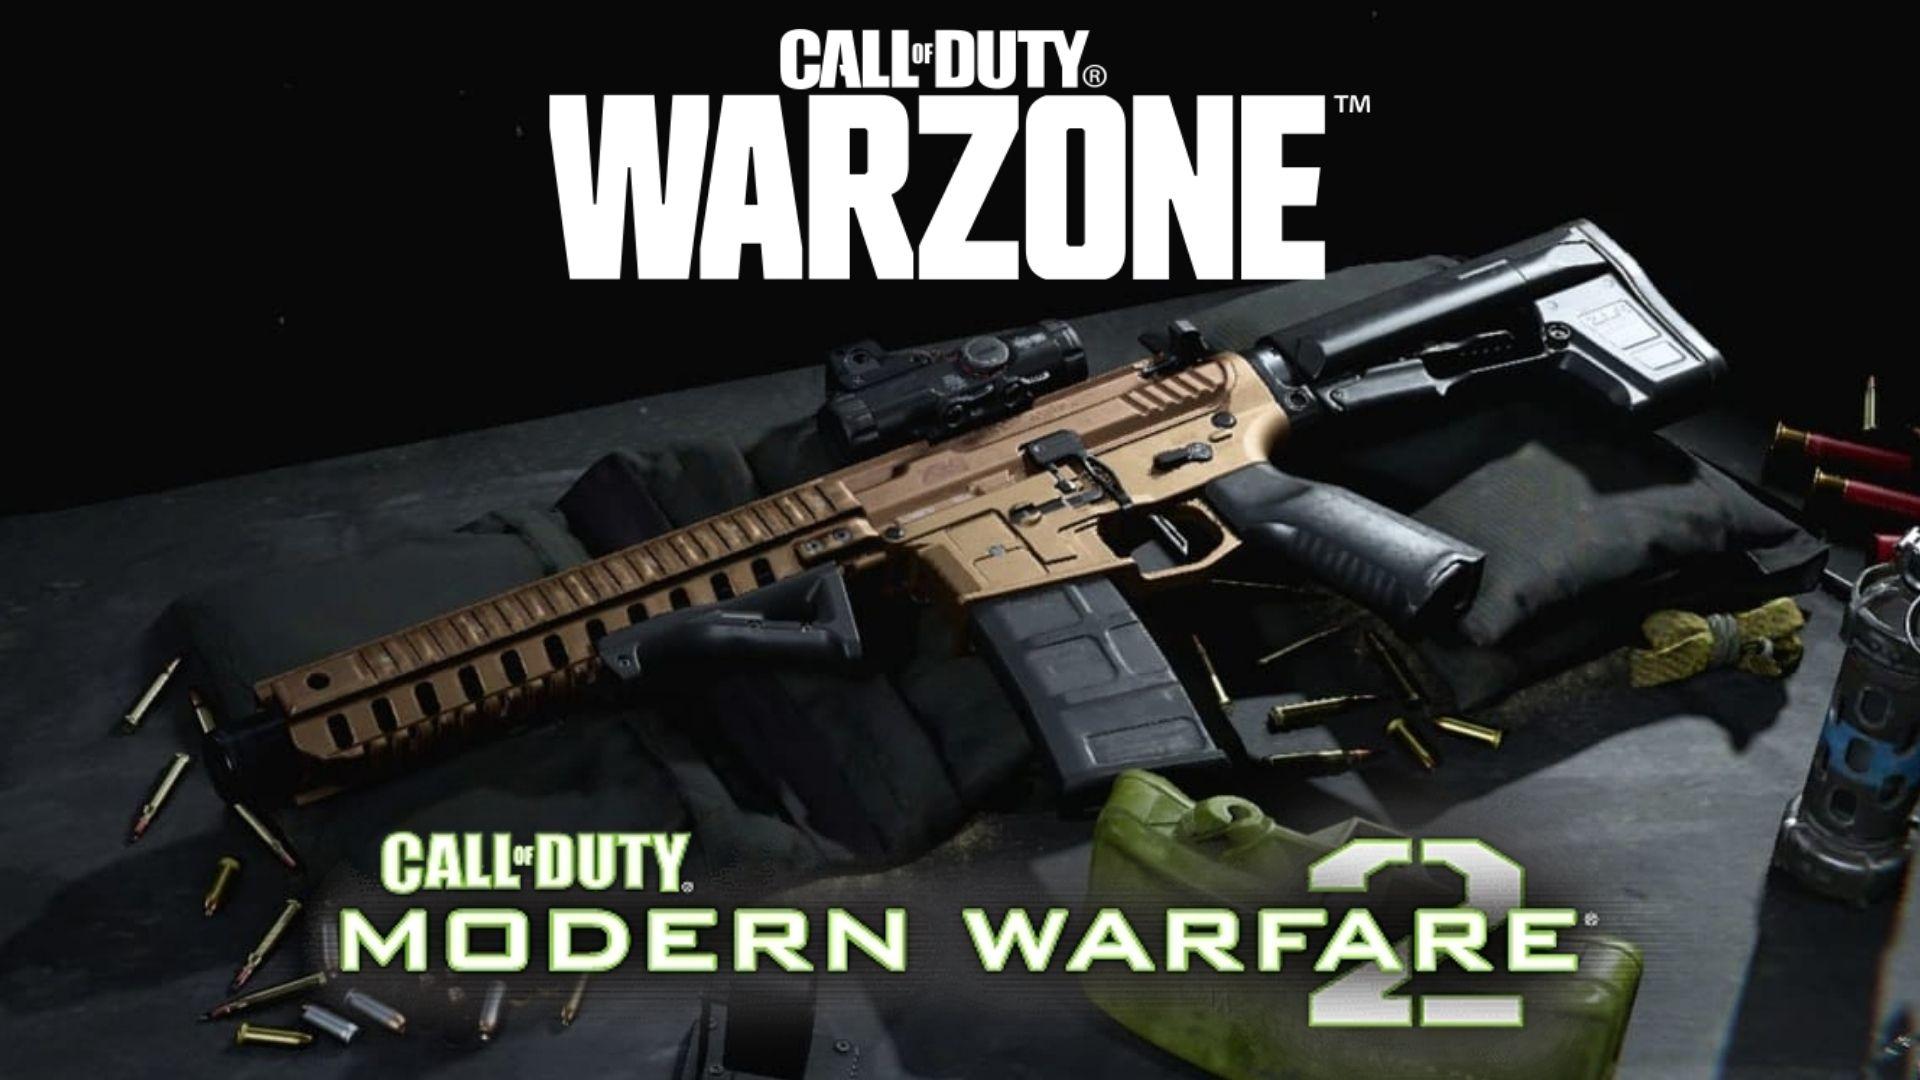 Call of Duty Warzone screenshot of the M4 weapon with the Modern Warfare logo below